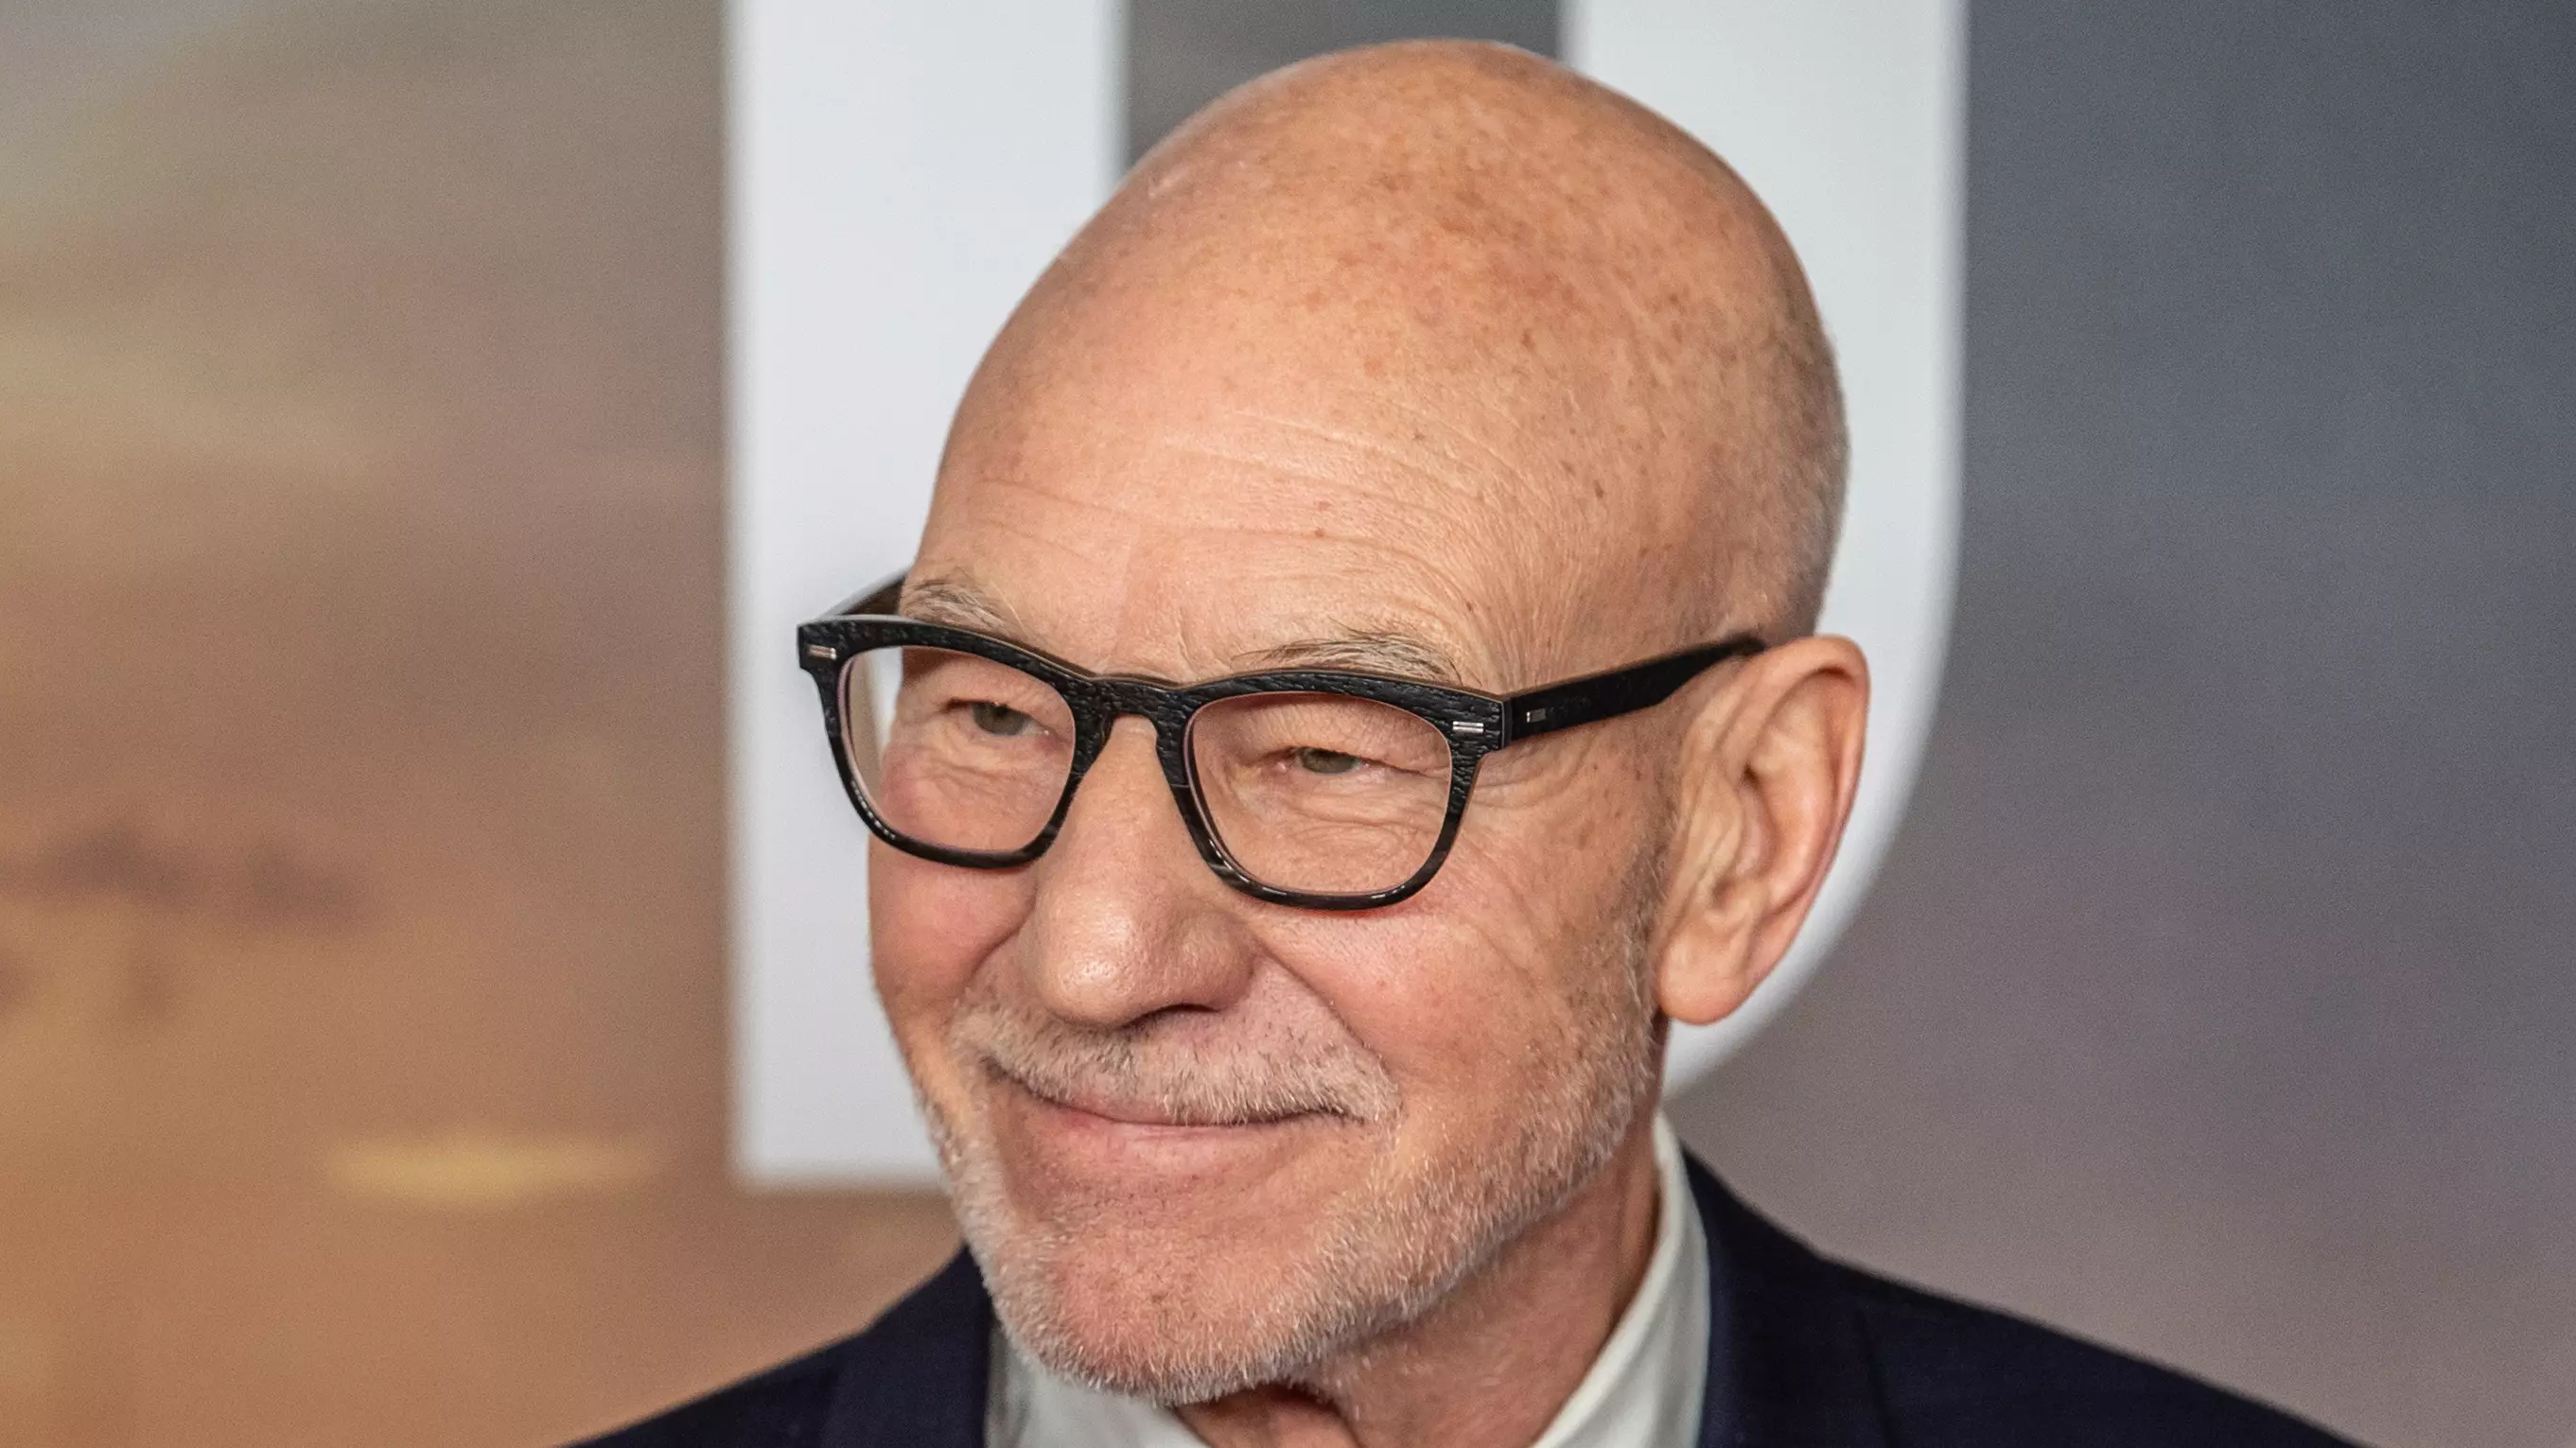 Sir Patrick Stewart Recites A Shakespeare Sonnet Each Day On Twitter During Self-Isolation